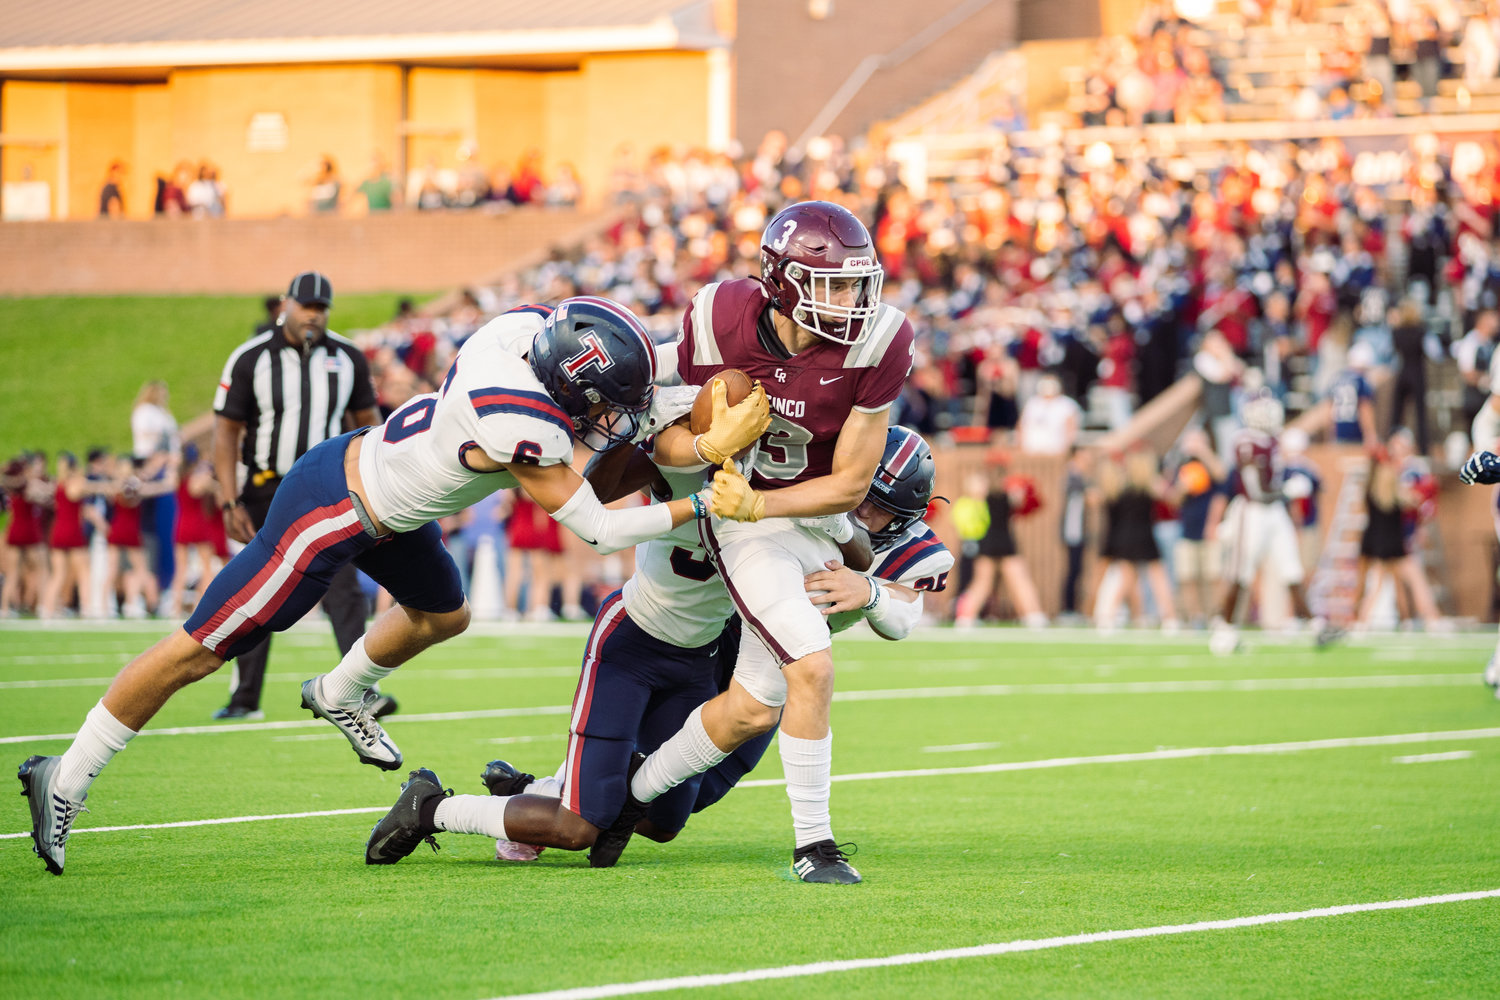 Cinco Ranch’s Seth Salverino fights for yardage after a catch during Friday’s game between Cinco Ranch and Tompkins at Rhodes Stadium.